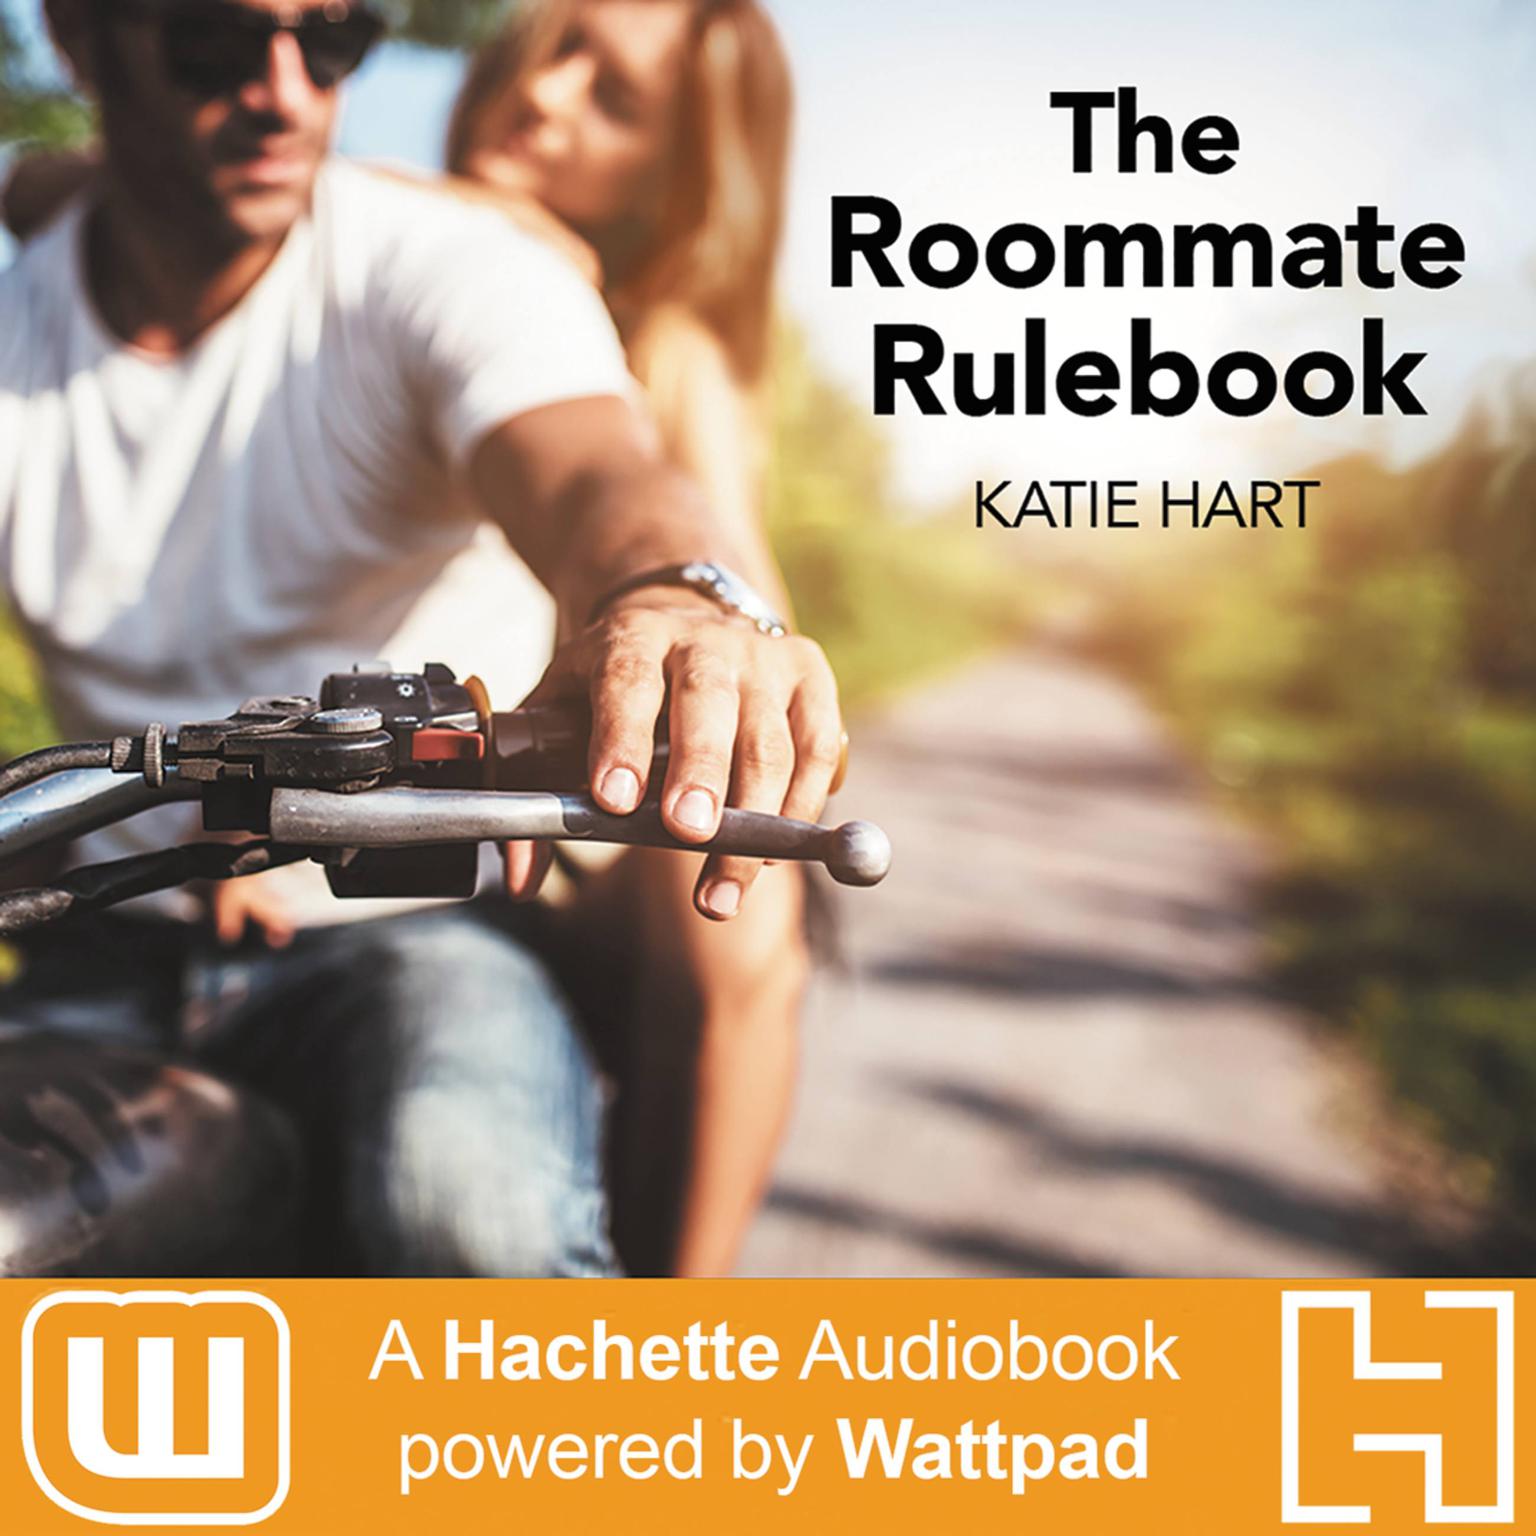 The Roommate Rulebook: A Hachette Audiobook powered by Wattpad Production Audiobook, by Katie Hart